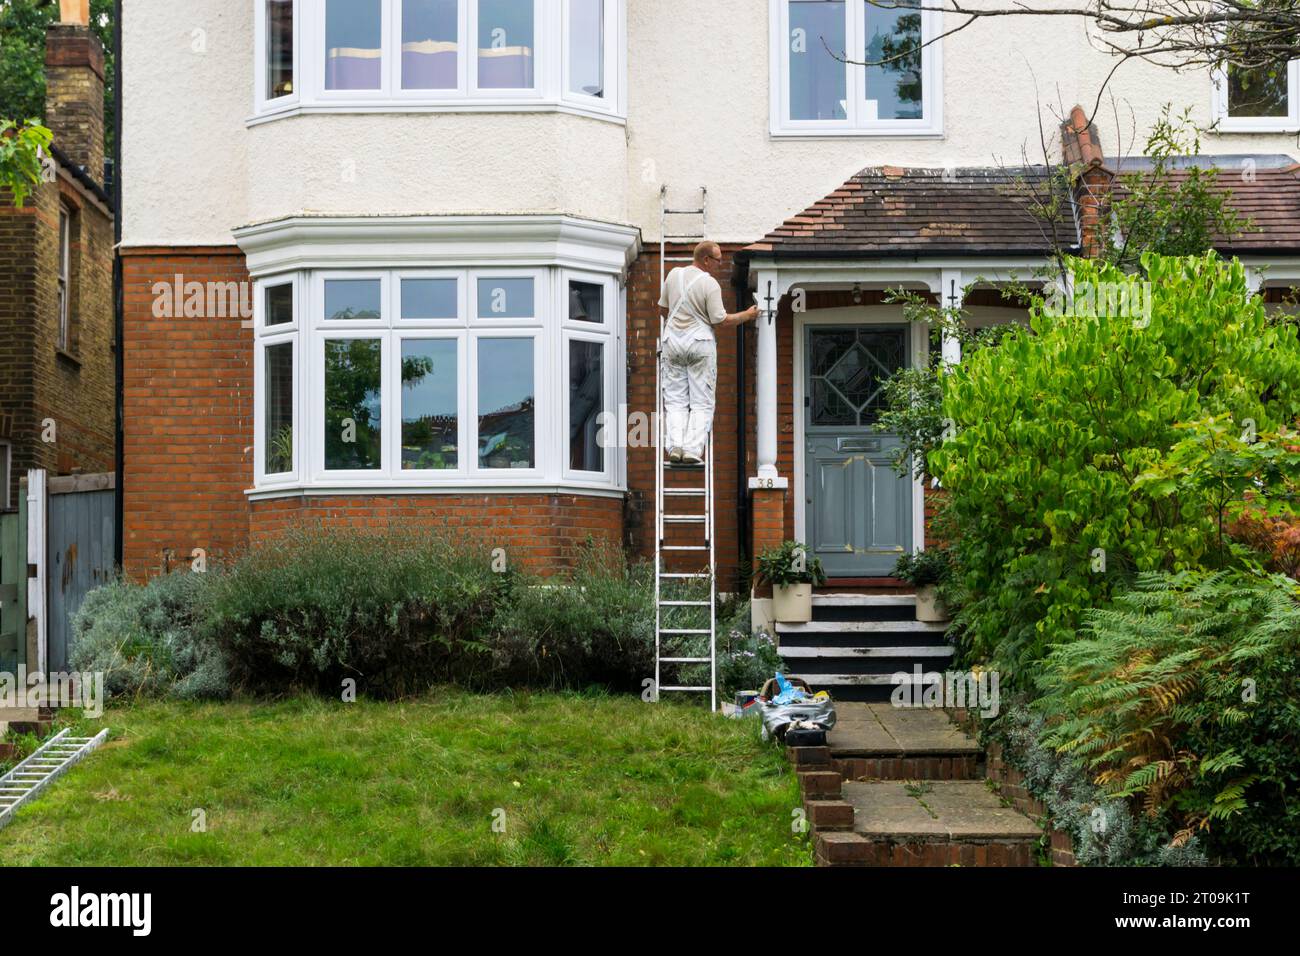 Man on ladder painting the front of a semi-detached house. Stock Photo